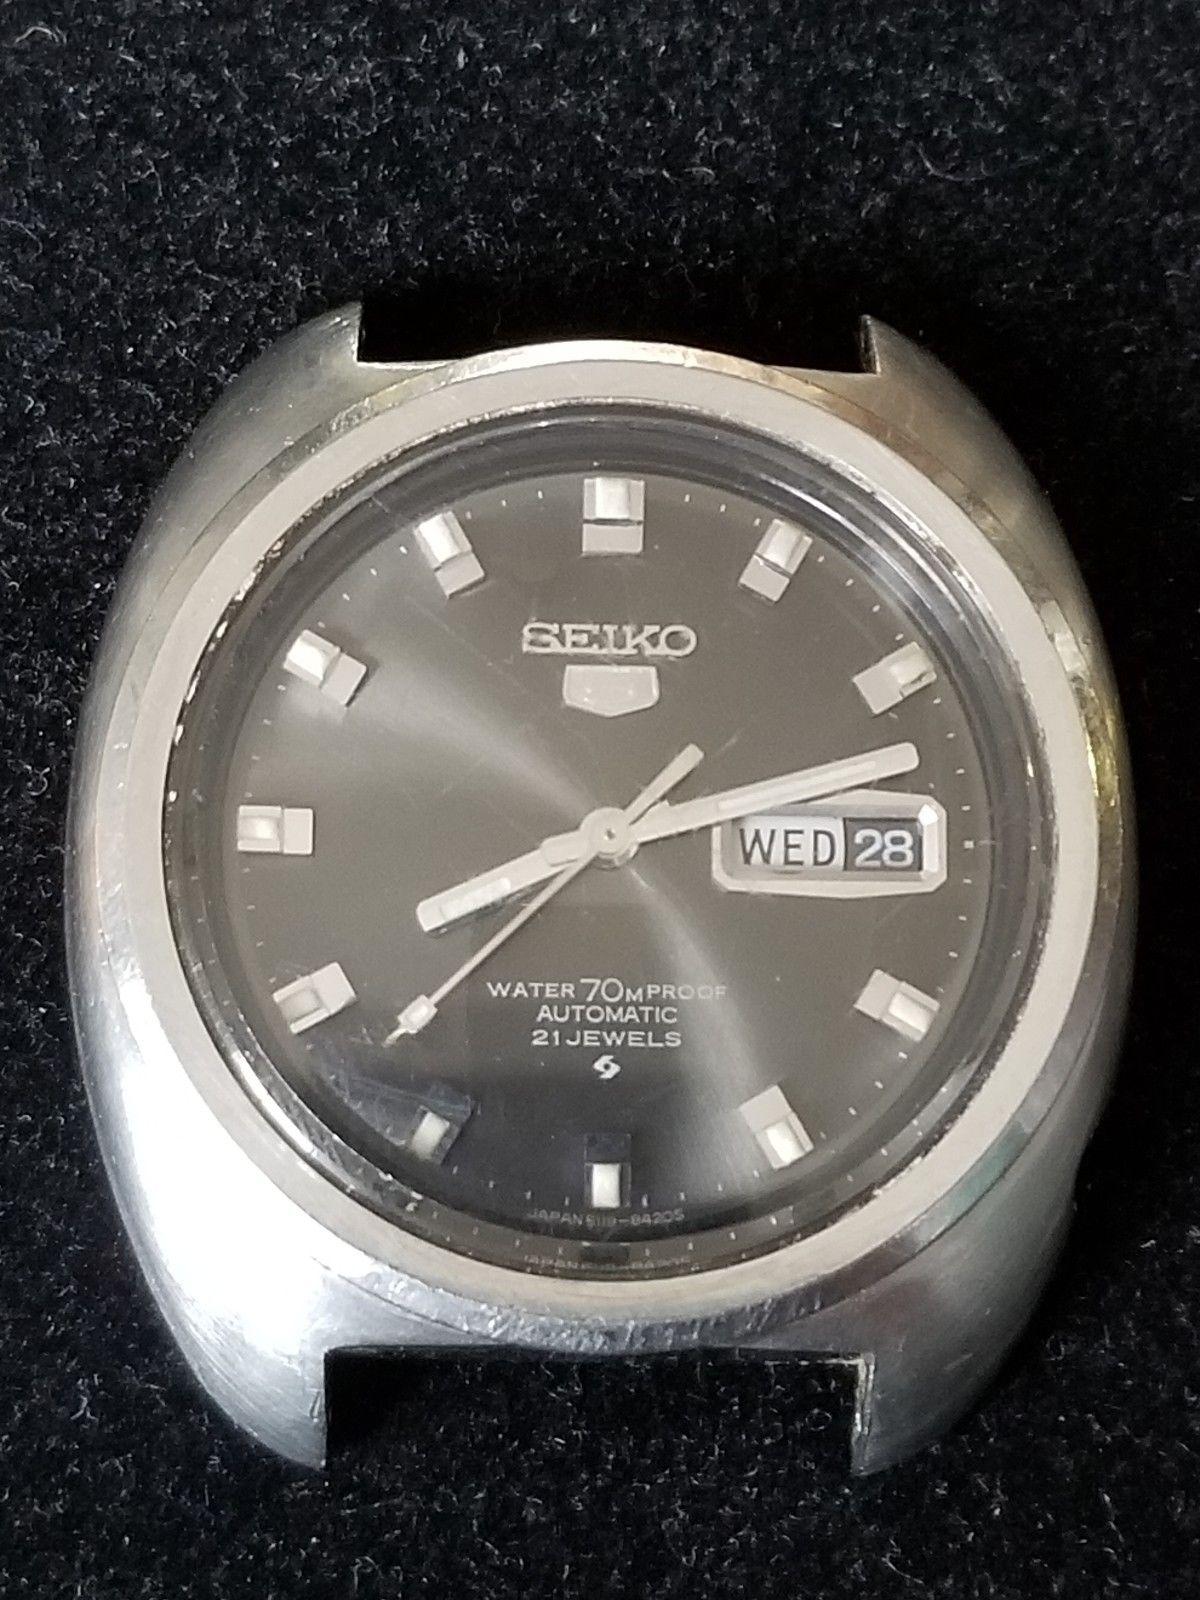 The Expanding the Seiko Collection - Your Watch Collection - Watch Repair  Talk